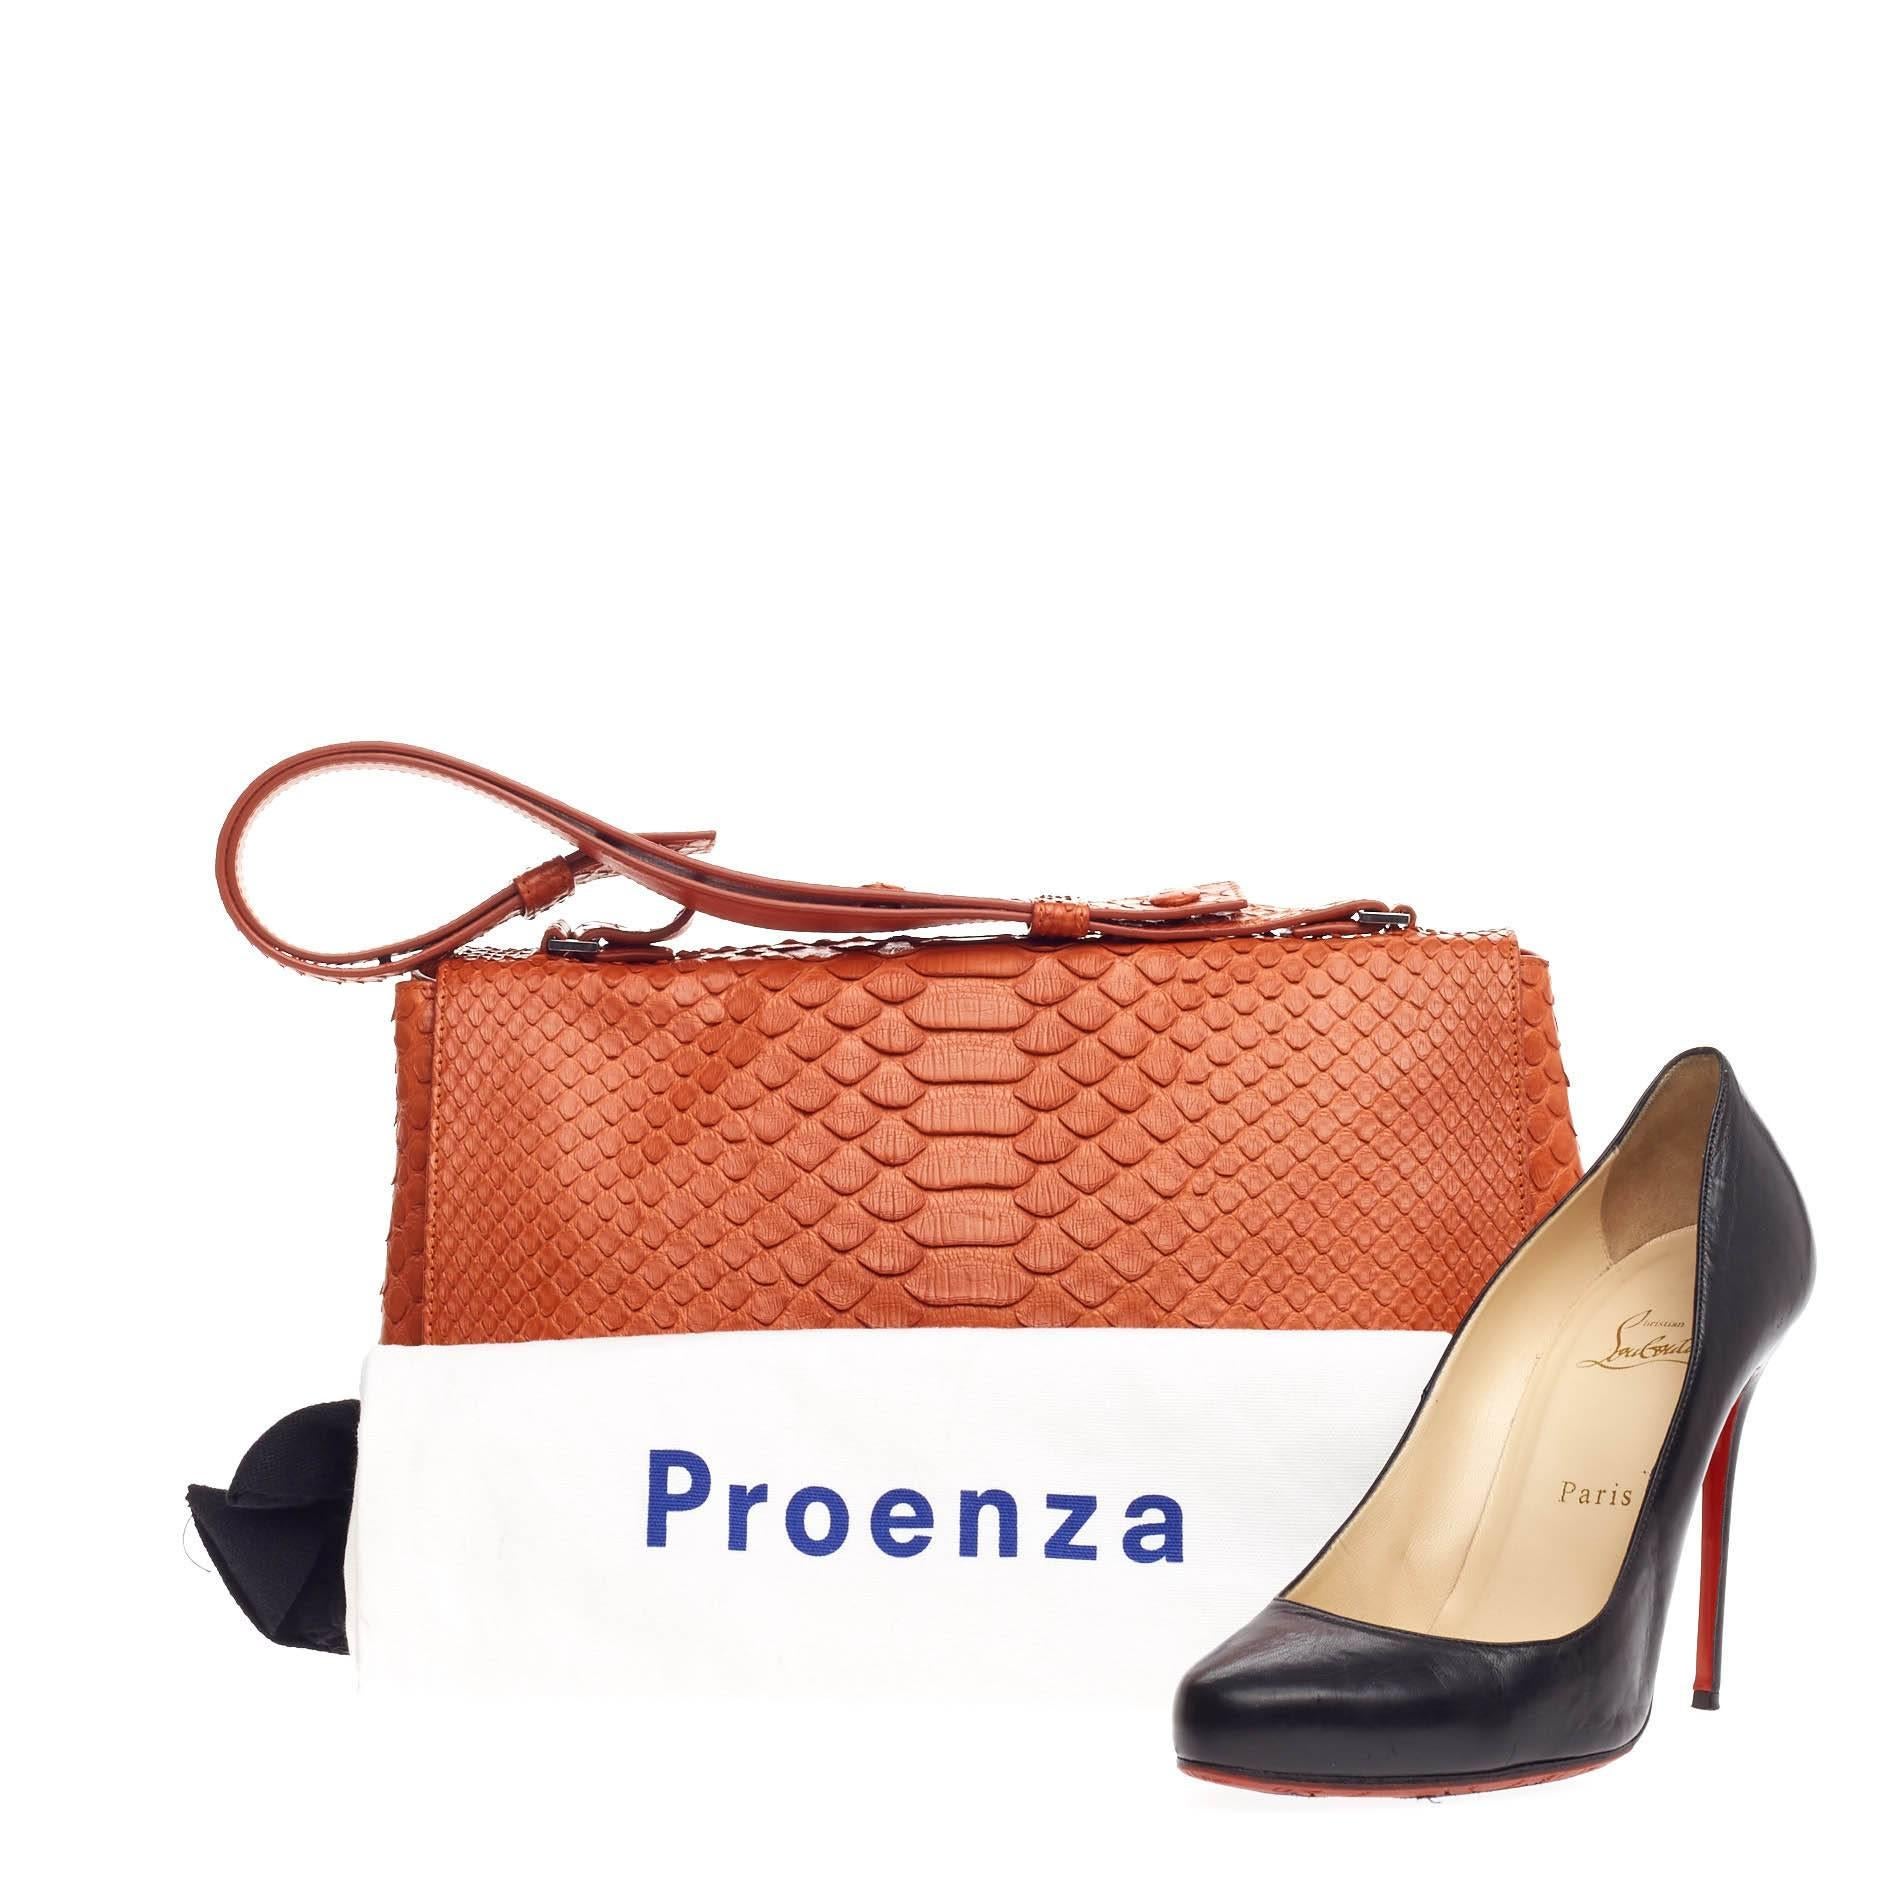 This authentic Proenza Schouler Courier Python Medium is a minimalistic stylish bag loved by fashionistas. Crafted from orange genuine python skin, this modern bag features adjustable snap-button shoulder strap, expandable snap sides, exterior back